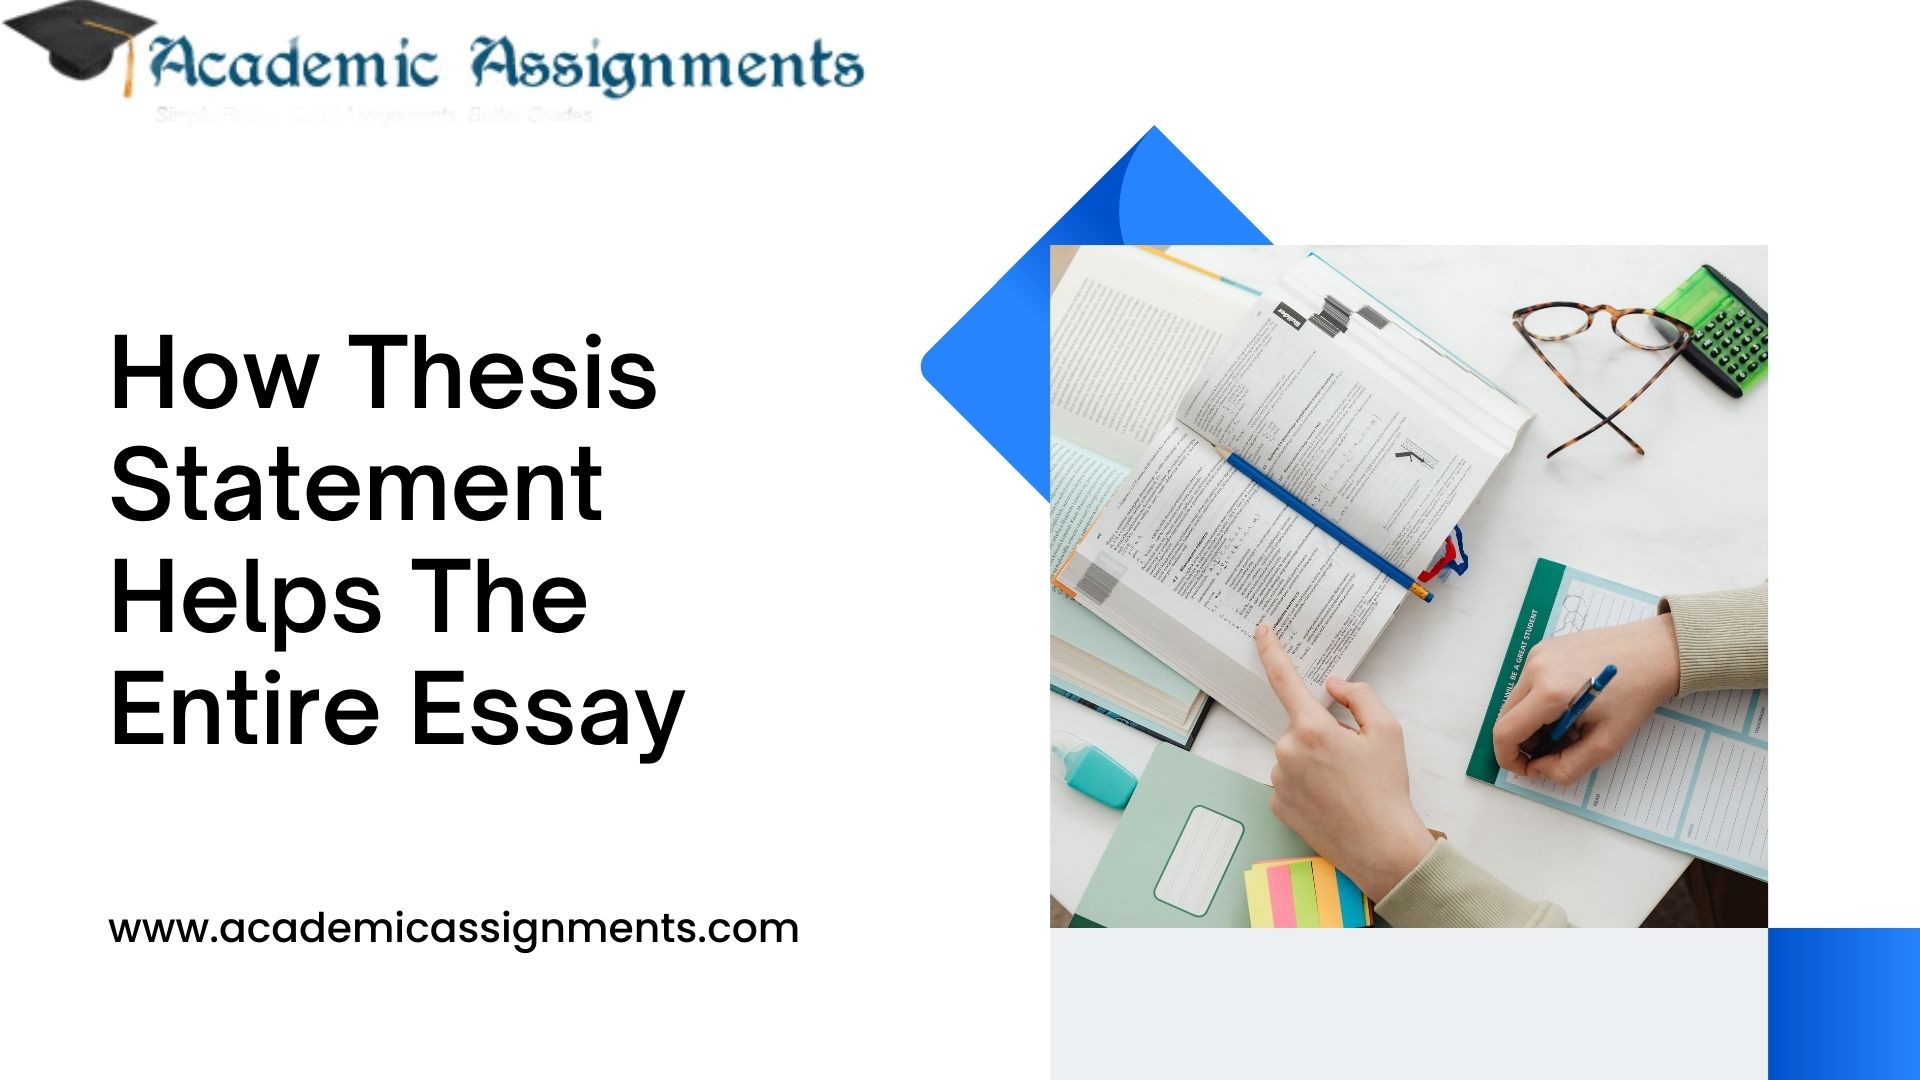 How Thesis Statement Helps The Entire Essay